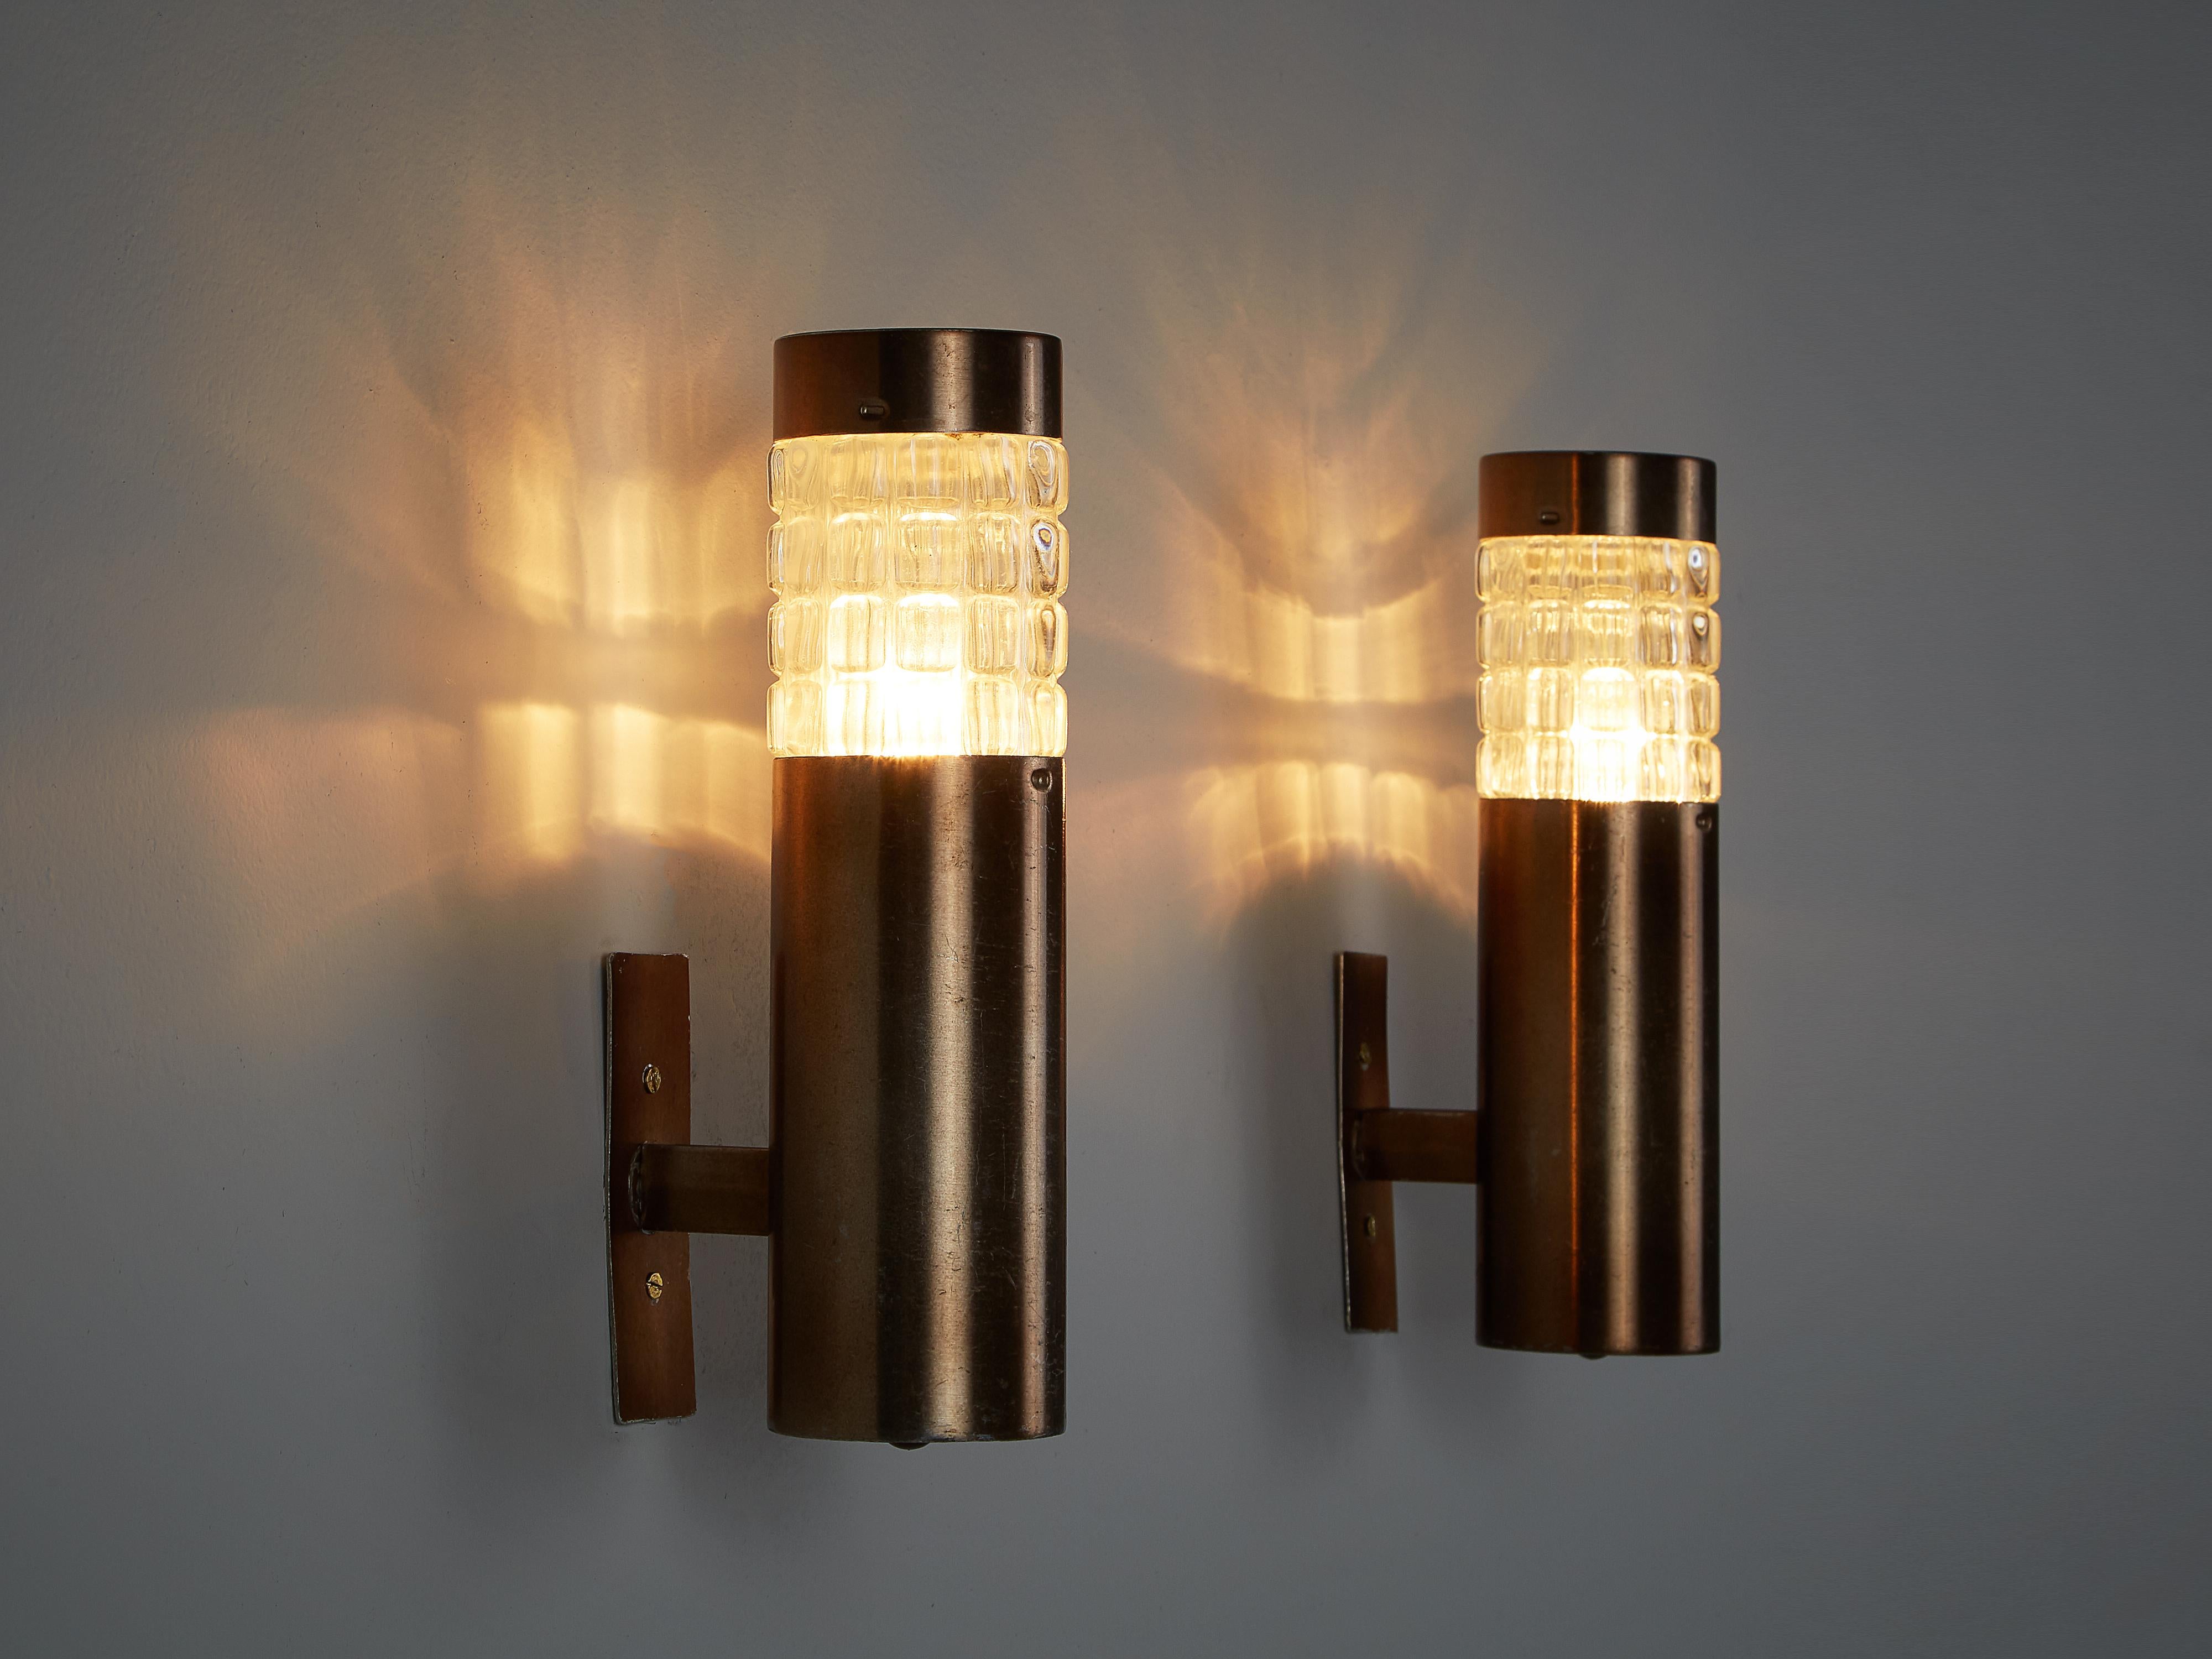 Wall lights, metal, cut glass, Italy, 1970s

These lovely sconces embody a clear construction based on a cylindric shape. The glass is cut in squares, creating an interesting pattern on the wall when lit. The copper colored metal forms a nice